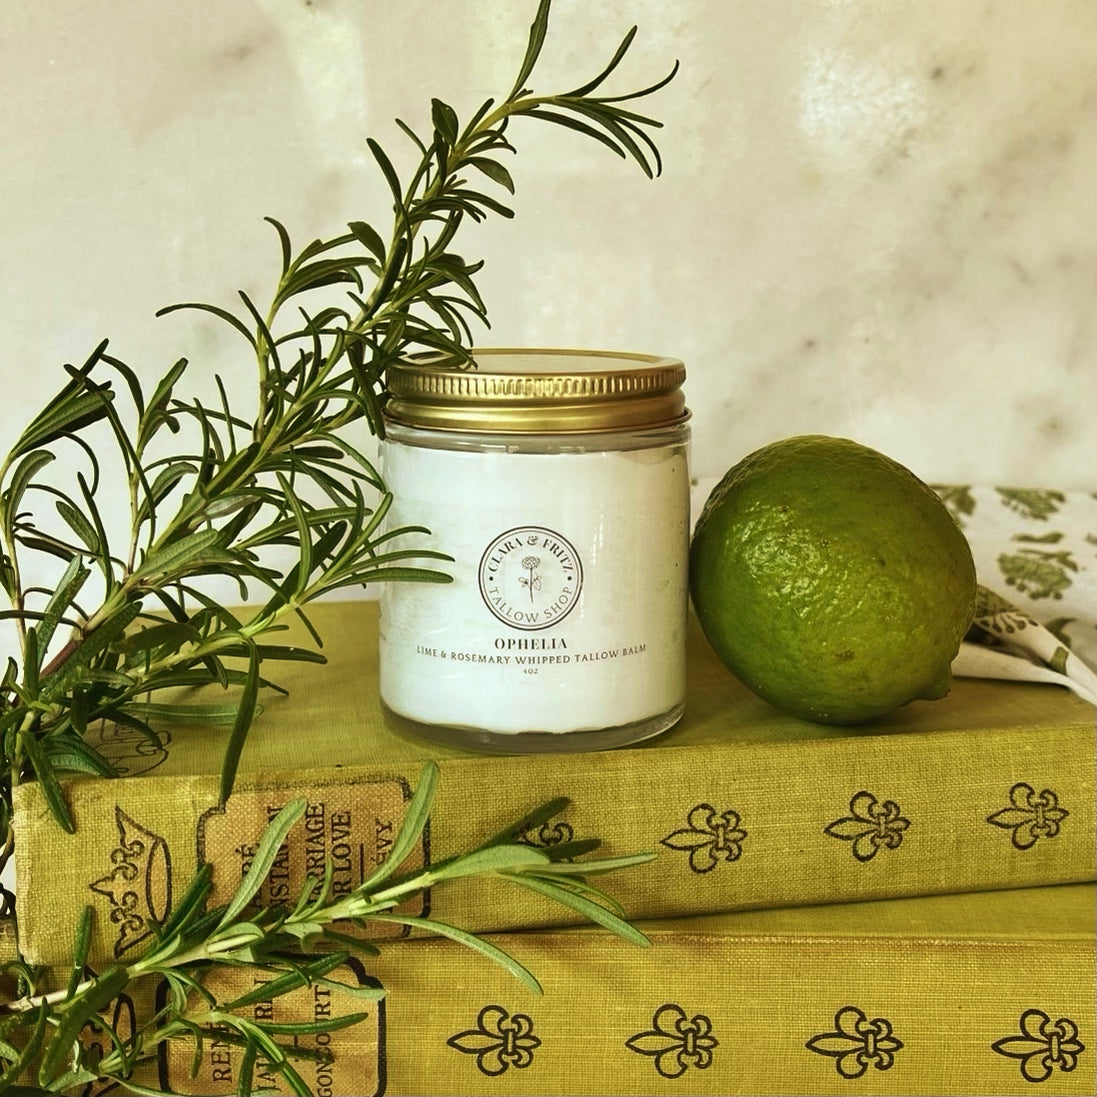 Ophelia Whipped Tallow Balm from Clara and Fritz